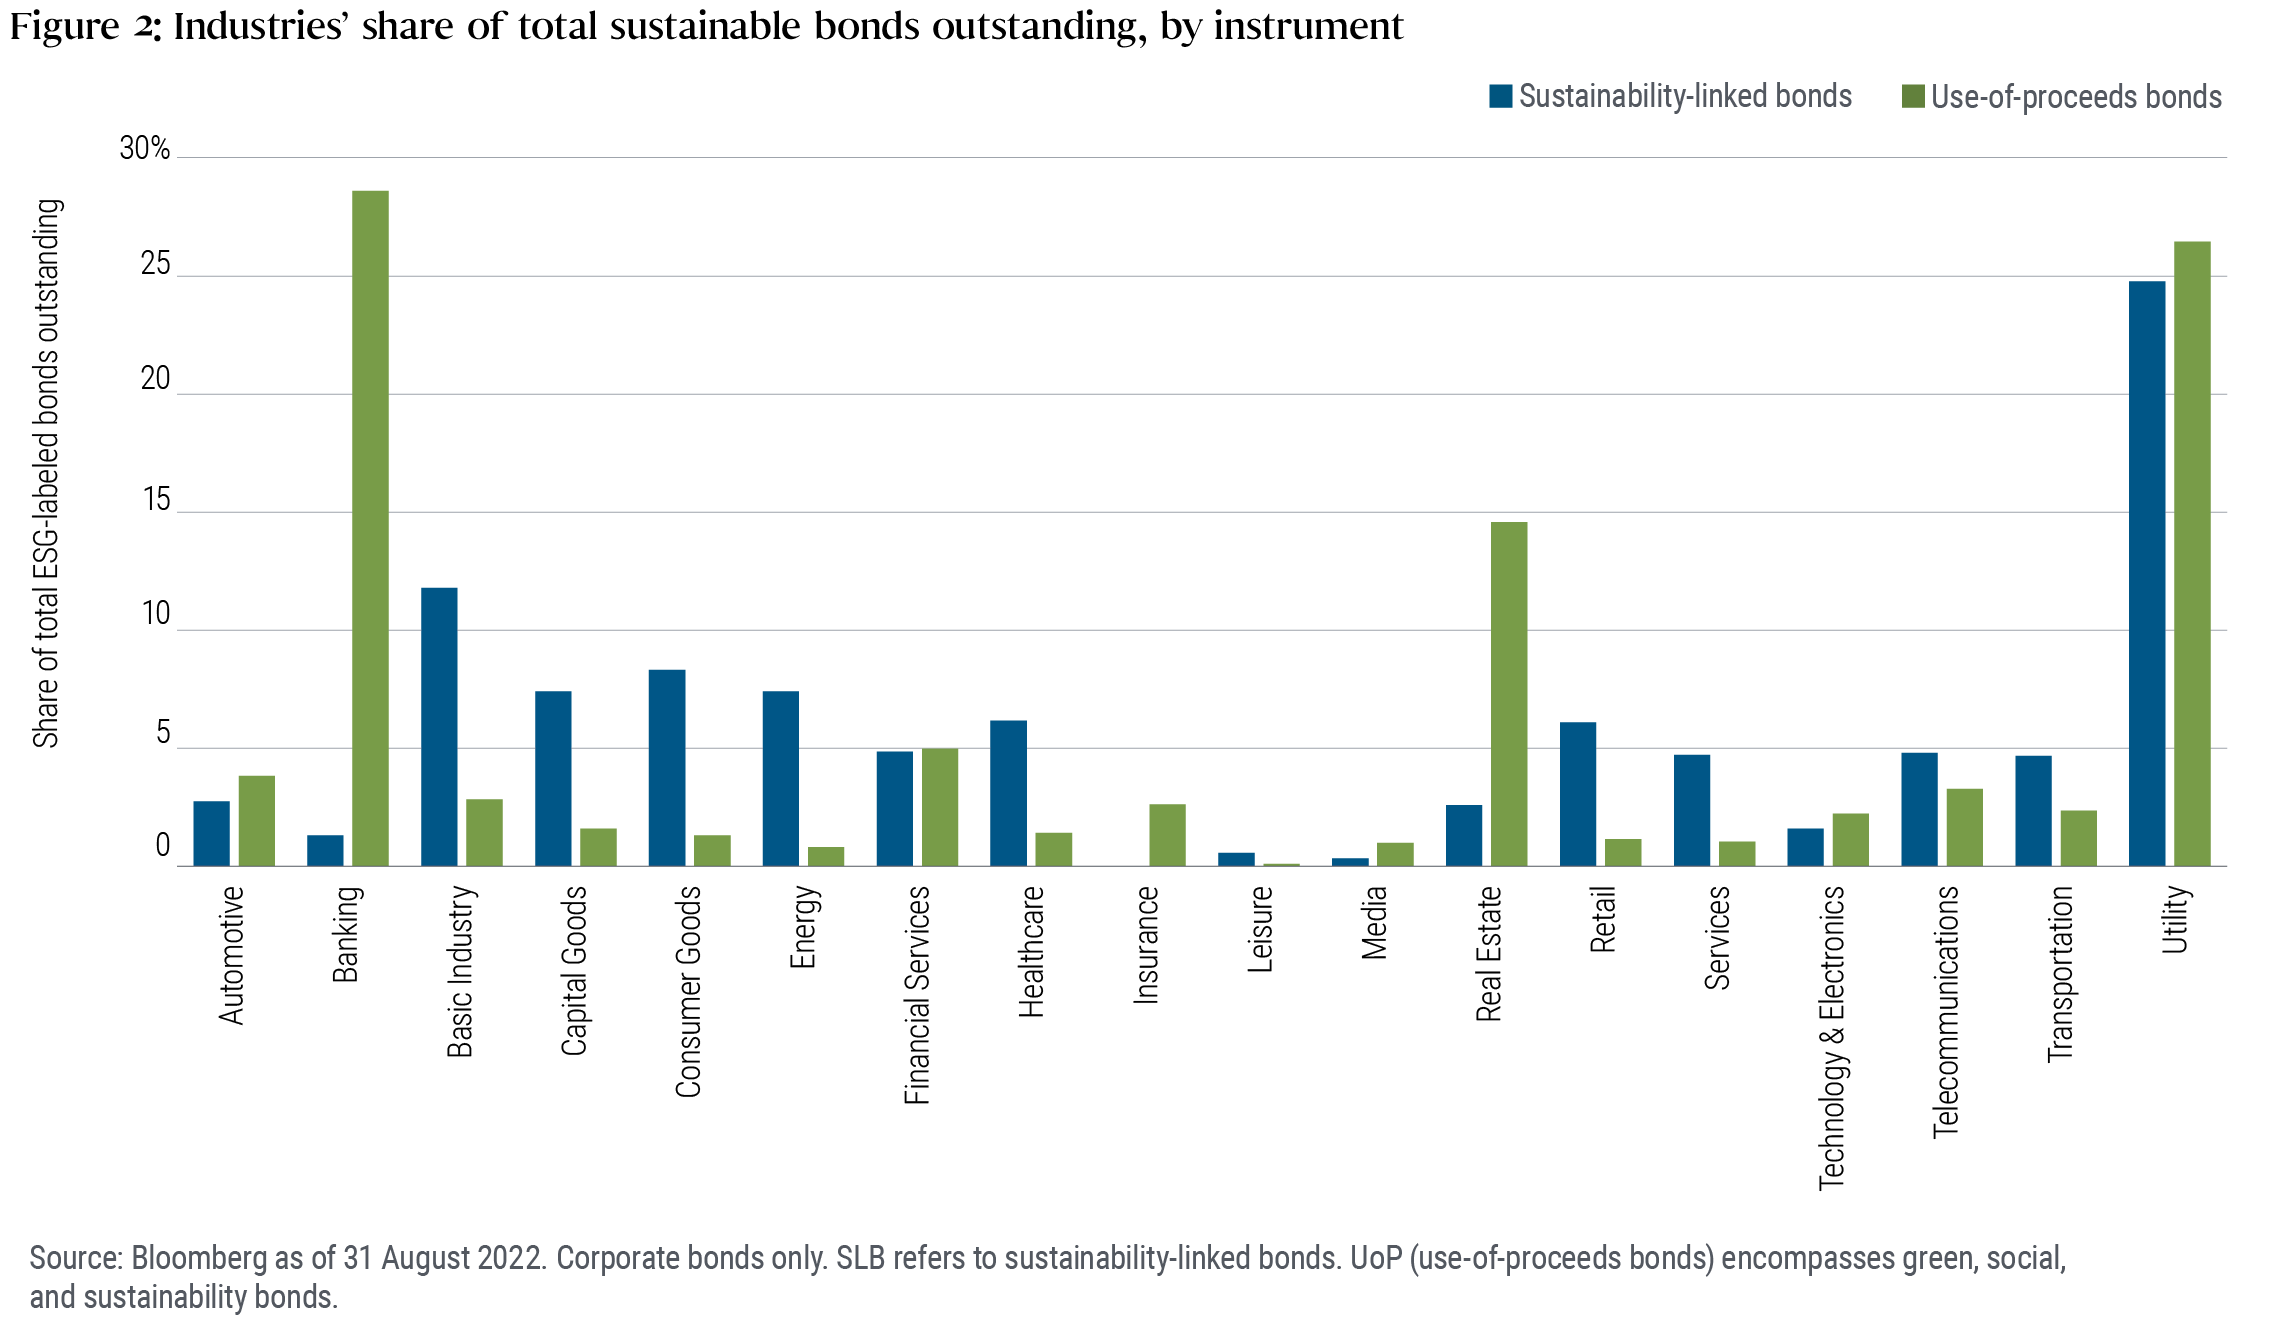 Figure 2 shows the market value share of outstanding corporate sustainability-linked bonds and use-of-proceeds bonds across 18 industries, based on ICE corporate indices data as of 31 August 2022. The share of corporate sustainability-linked bonds outstanding ranges from zero for the insurance industry to 4.7% each for the services and transportation industries, to 11.8% for basic industries, and 24.8% for utilities. The share of corporate use-of-proceeds bonds outstanding ranges from 0.1% for the leisure industry, to 3.8% for the automotive industry, to 14.6% for the real estate industry, and 28.6% for the banking industry.